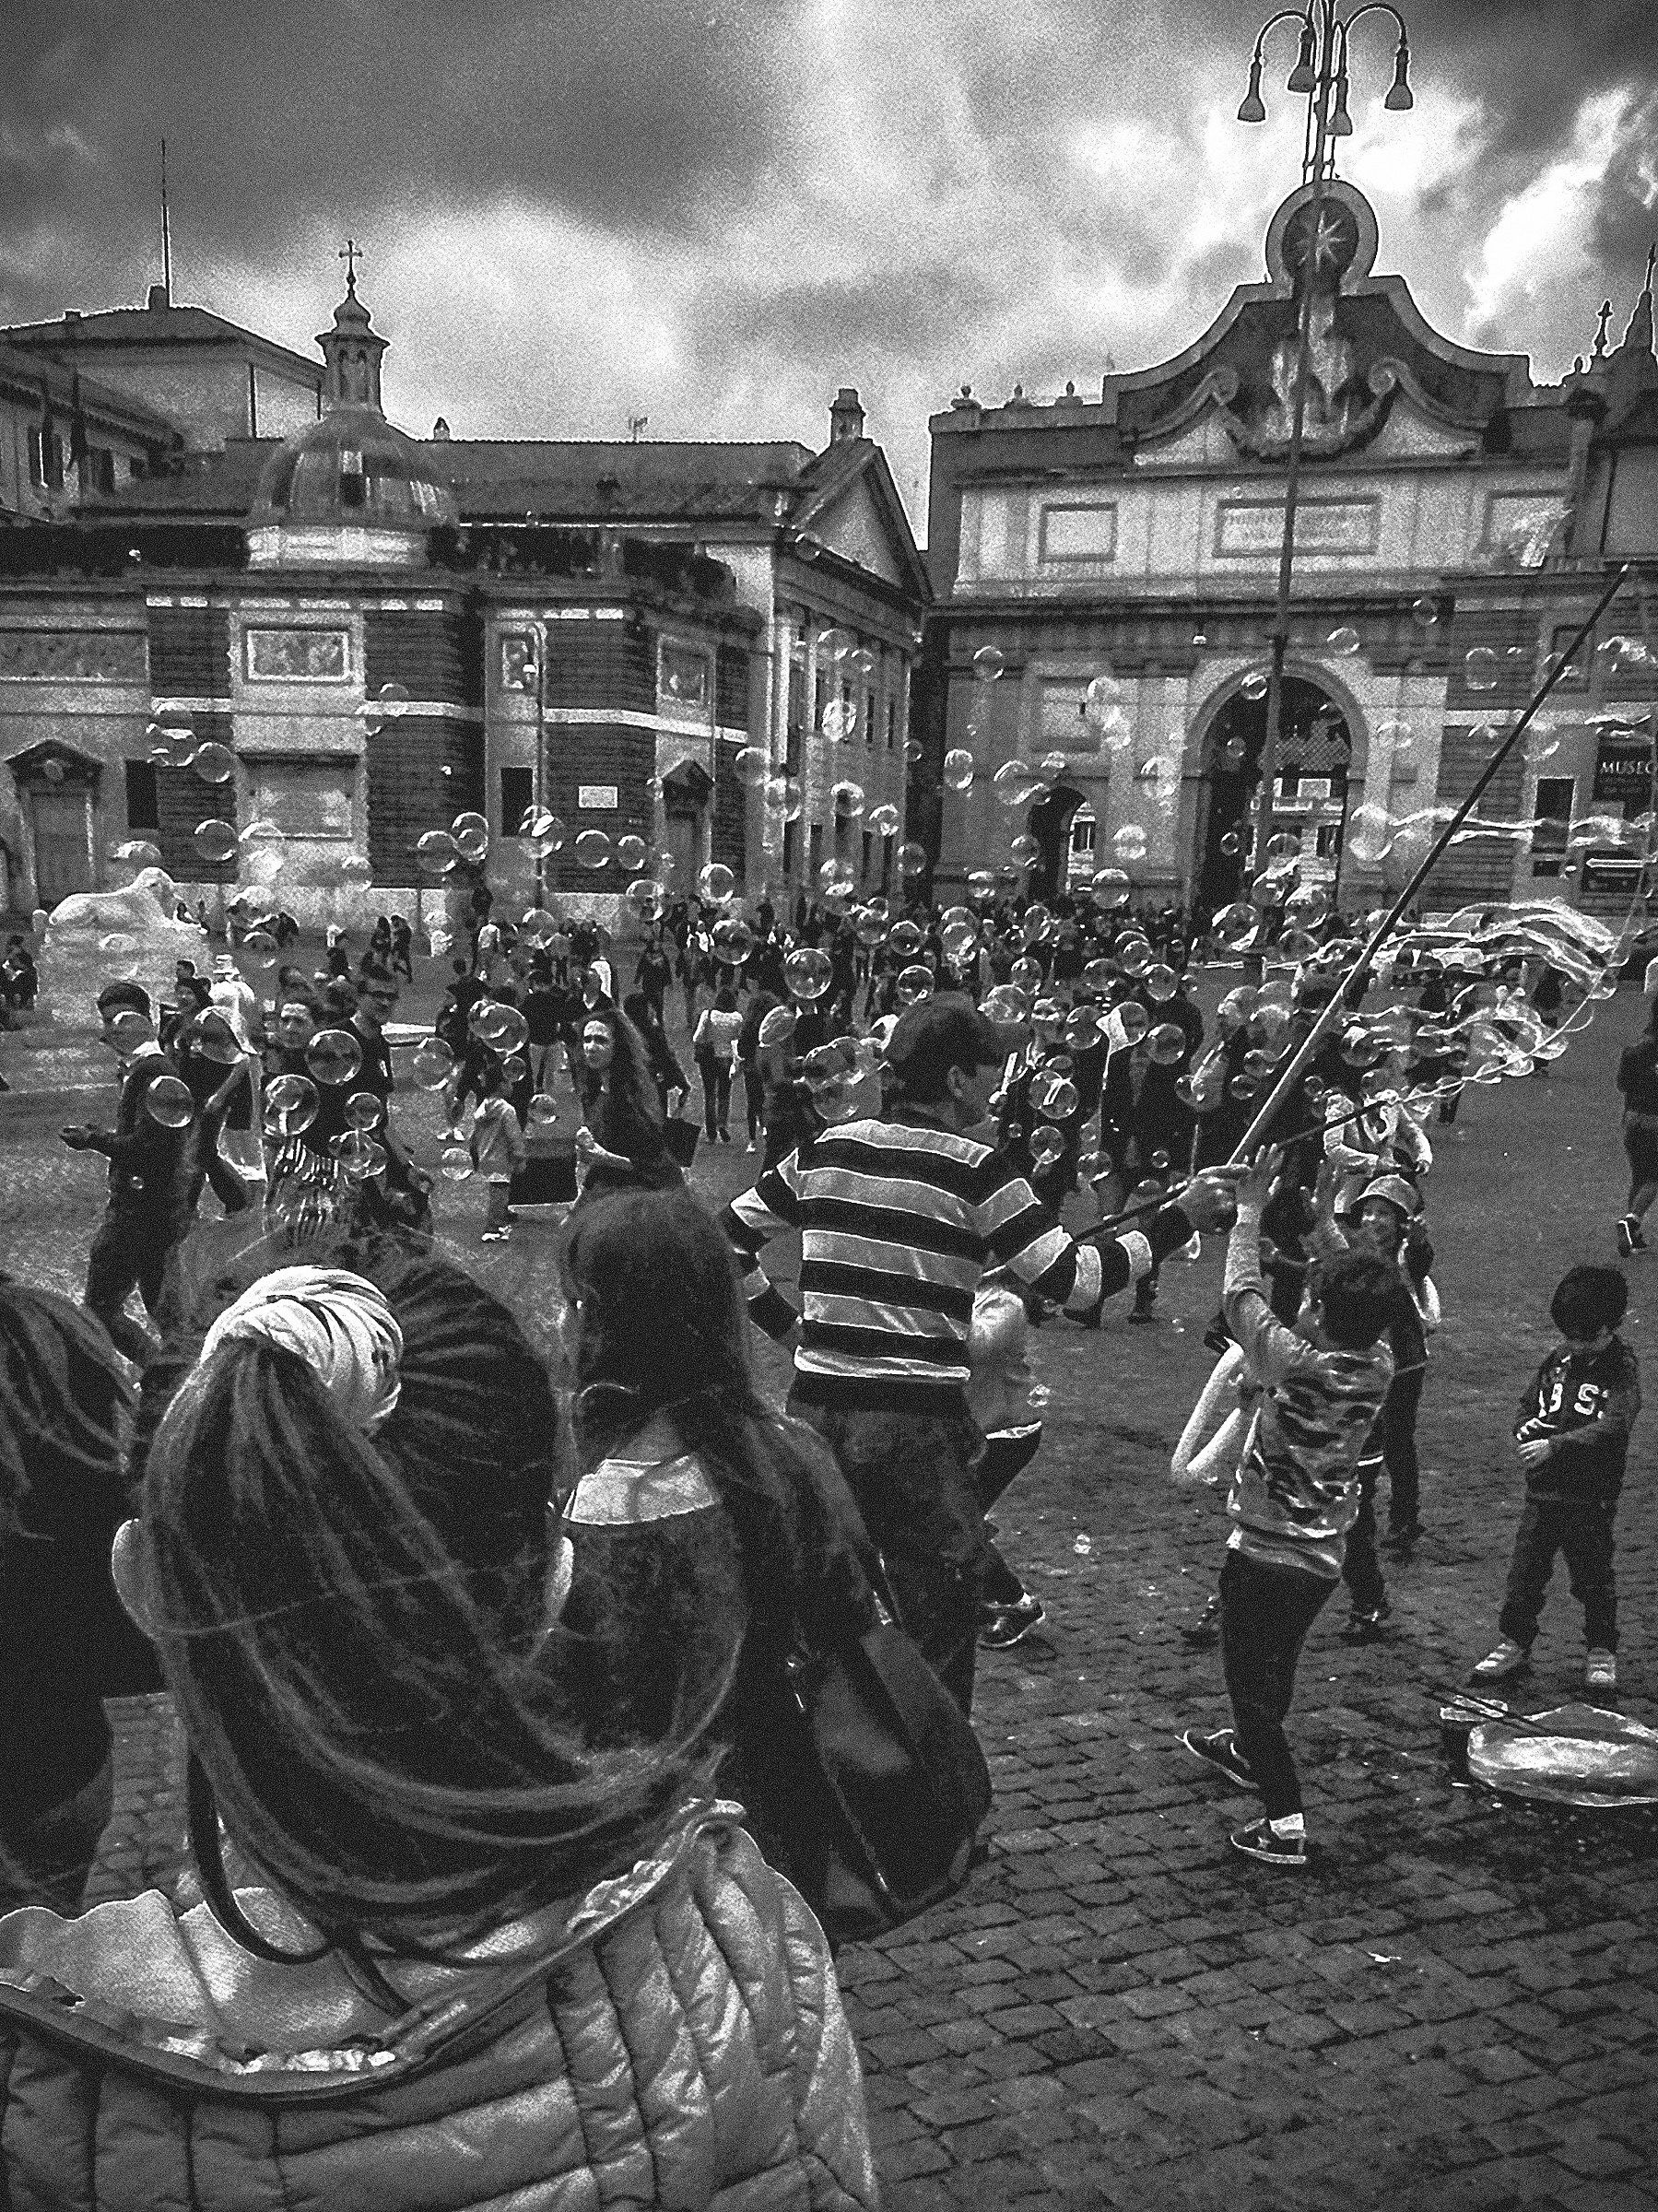 Children and bubbles in the square in Rome Bw...